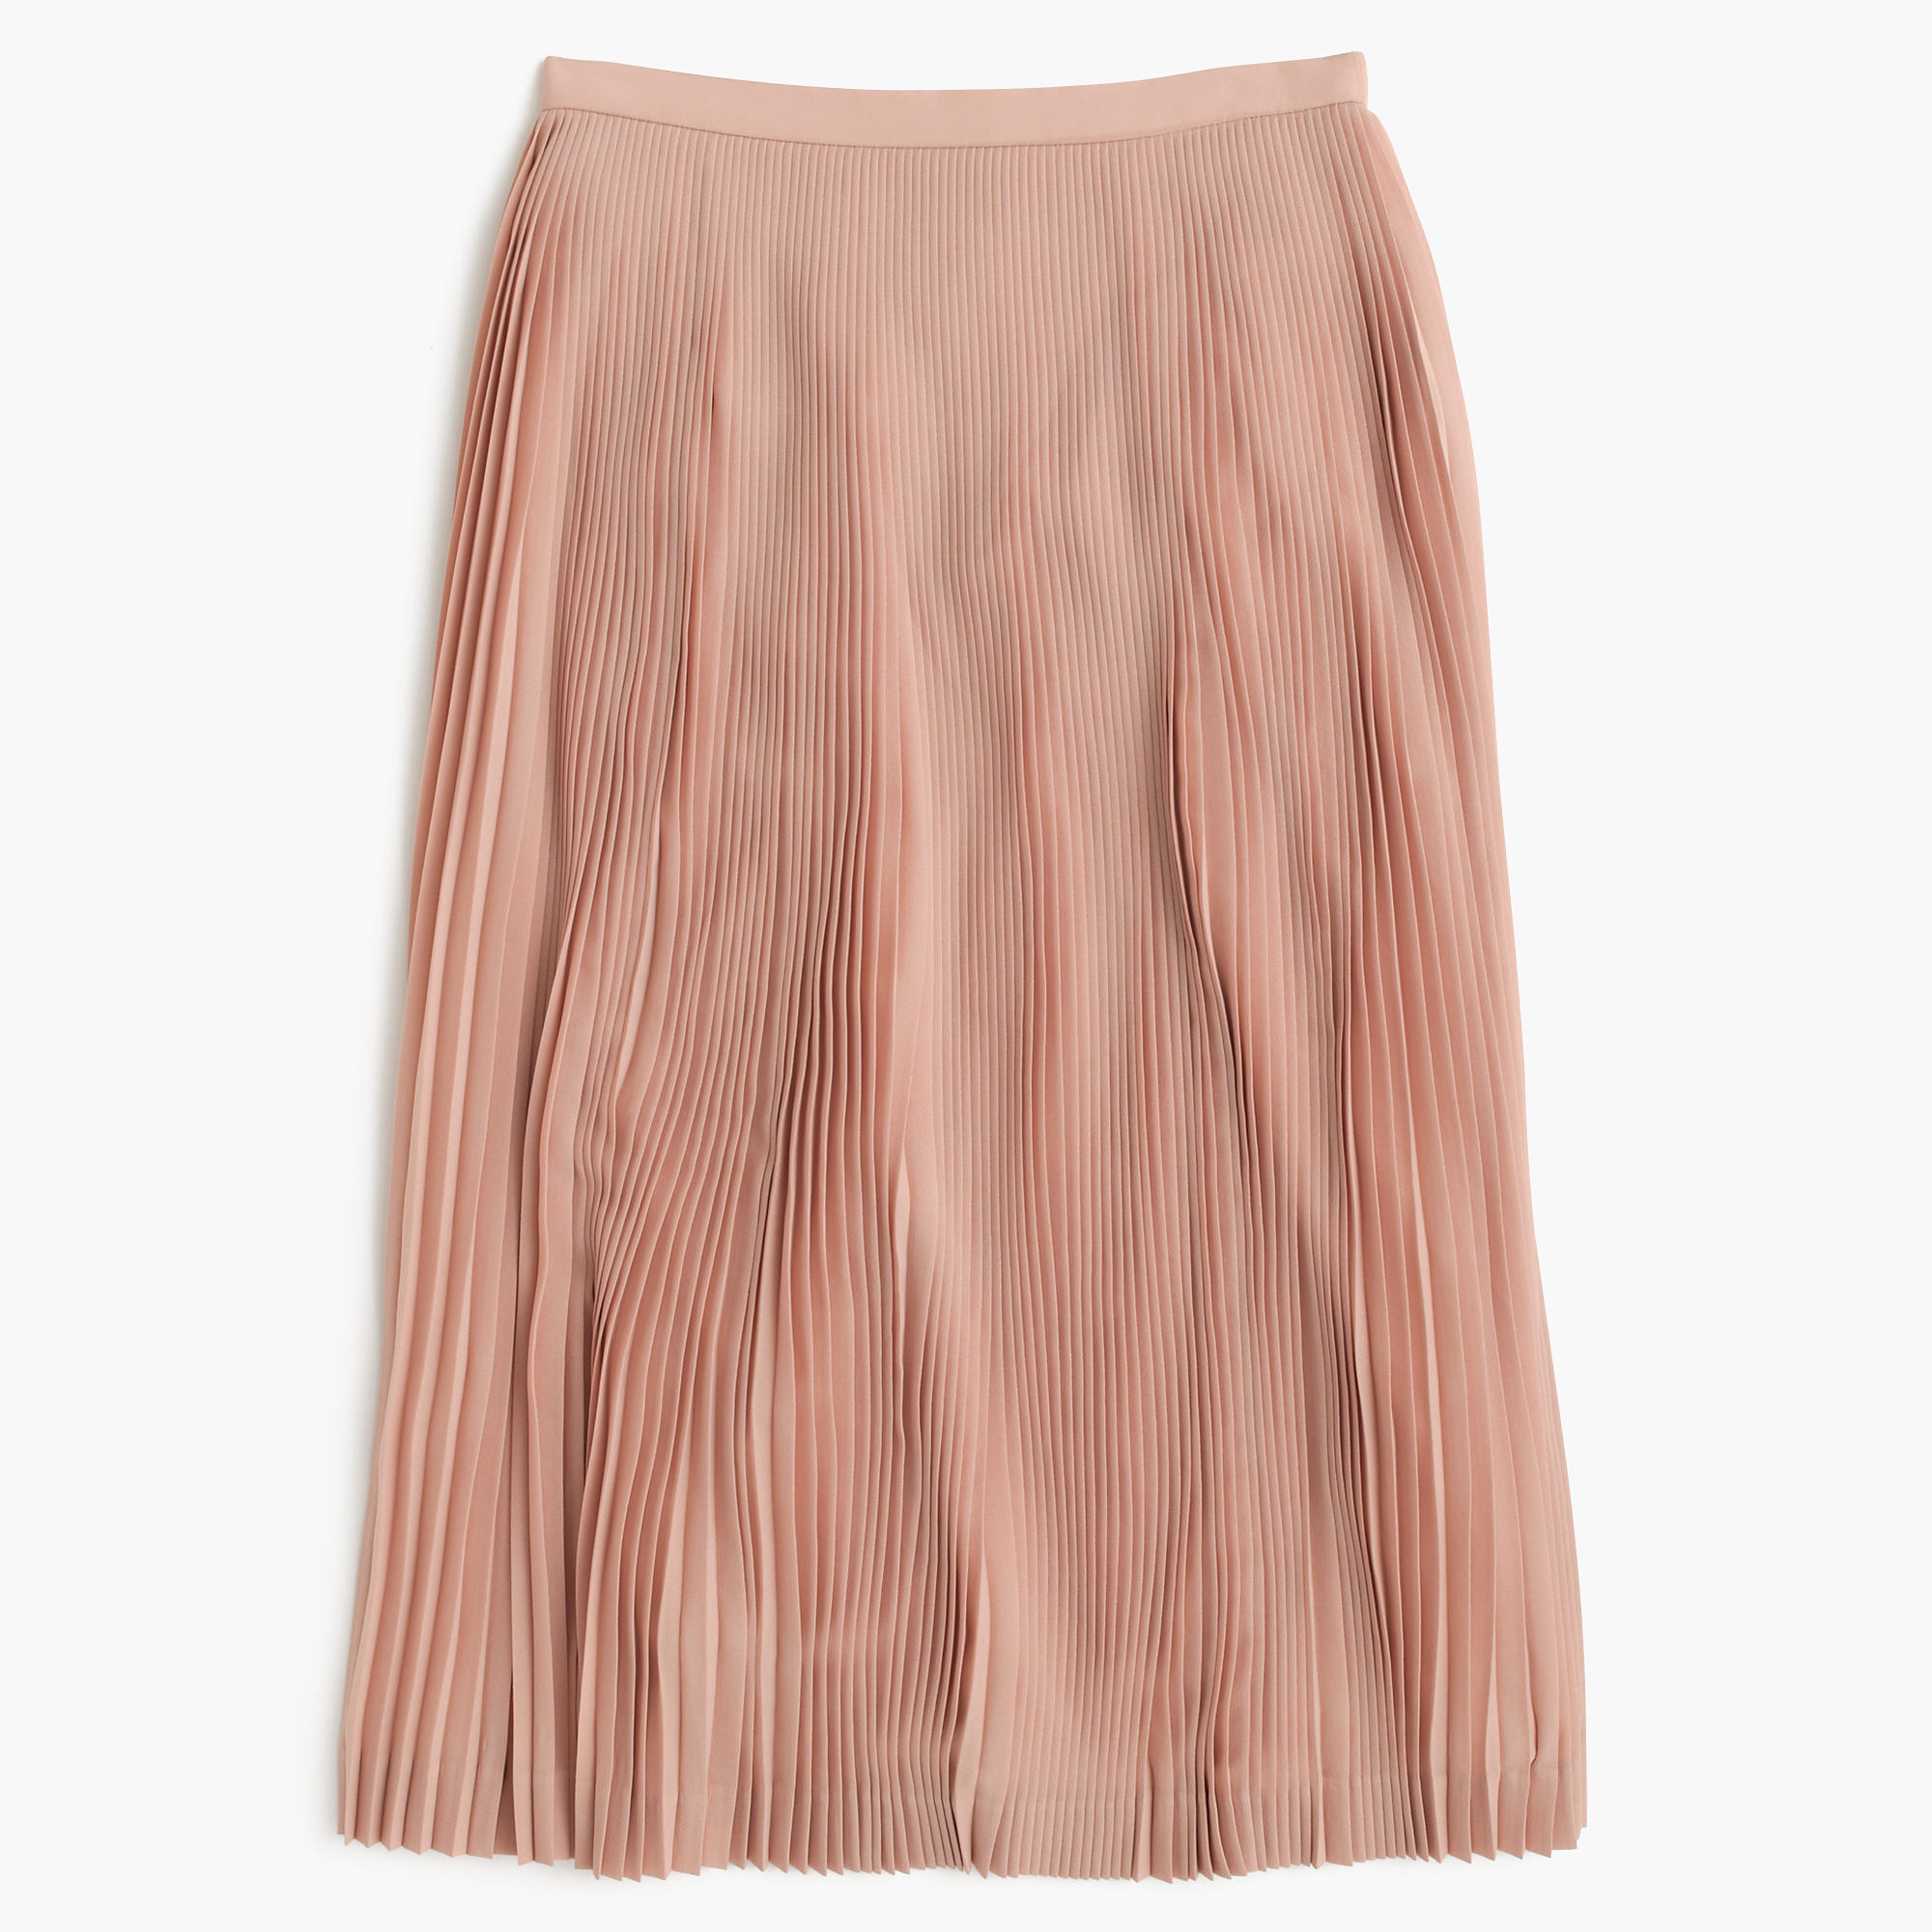 Pleated Skirts | Fashion Jobs in Toronto, Vancouver, Montreal and ...